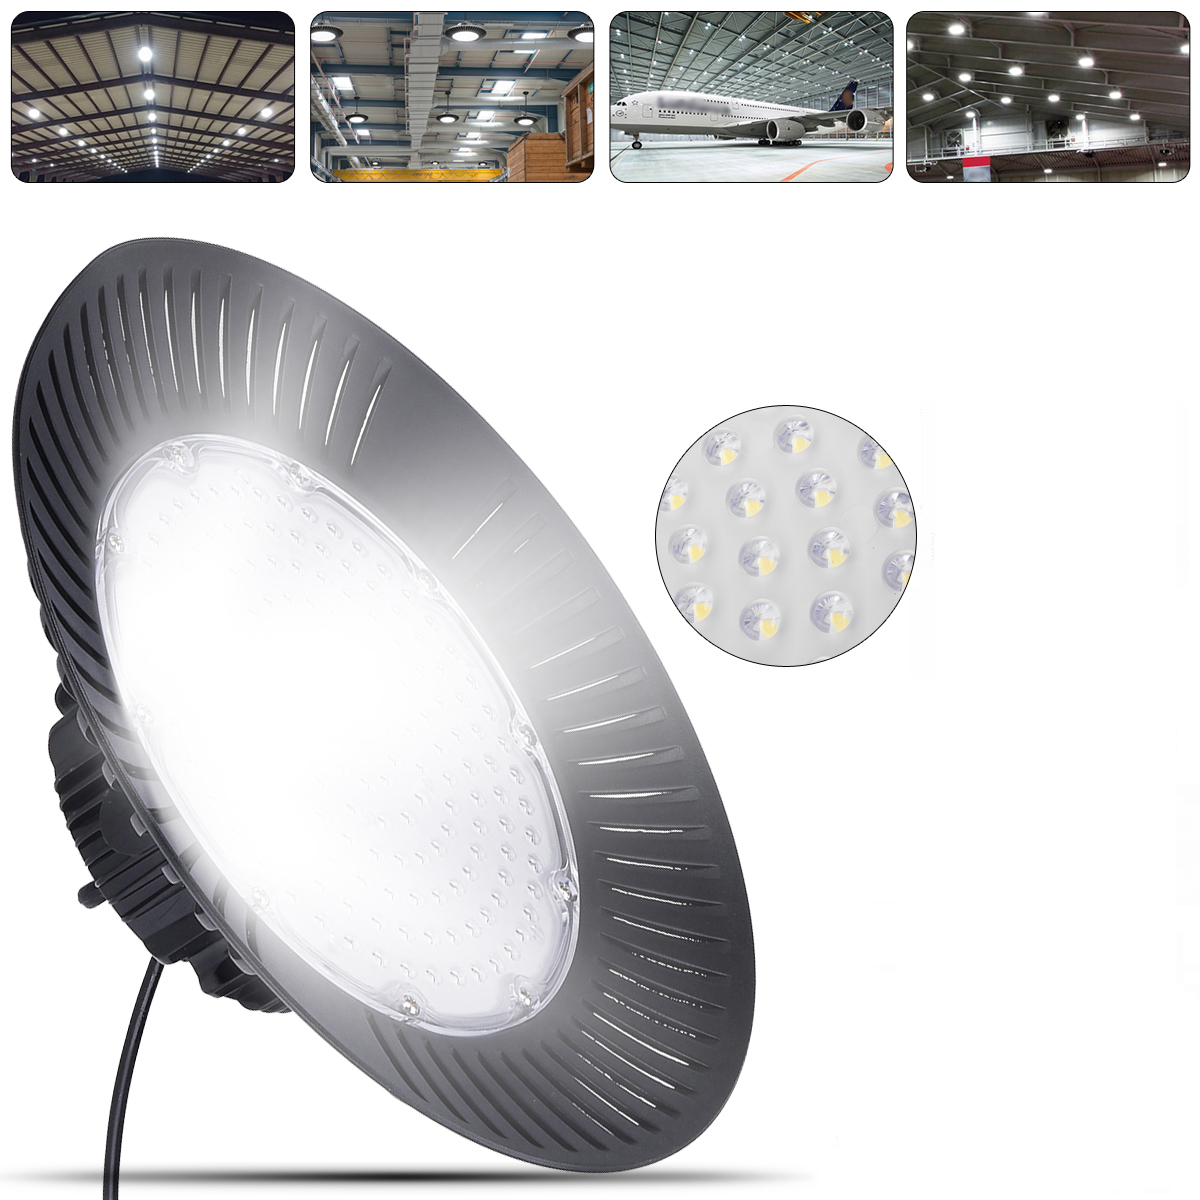 Find 100W/150W /200W UFO LED High Bay Light 220V 1.5M AU Plug Cable Warehouse Industrial Shed Workshop Factory Lamp With 30CM Hanging Chain&Hook for Sale on Gipsybee.com with cryptocurrencies